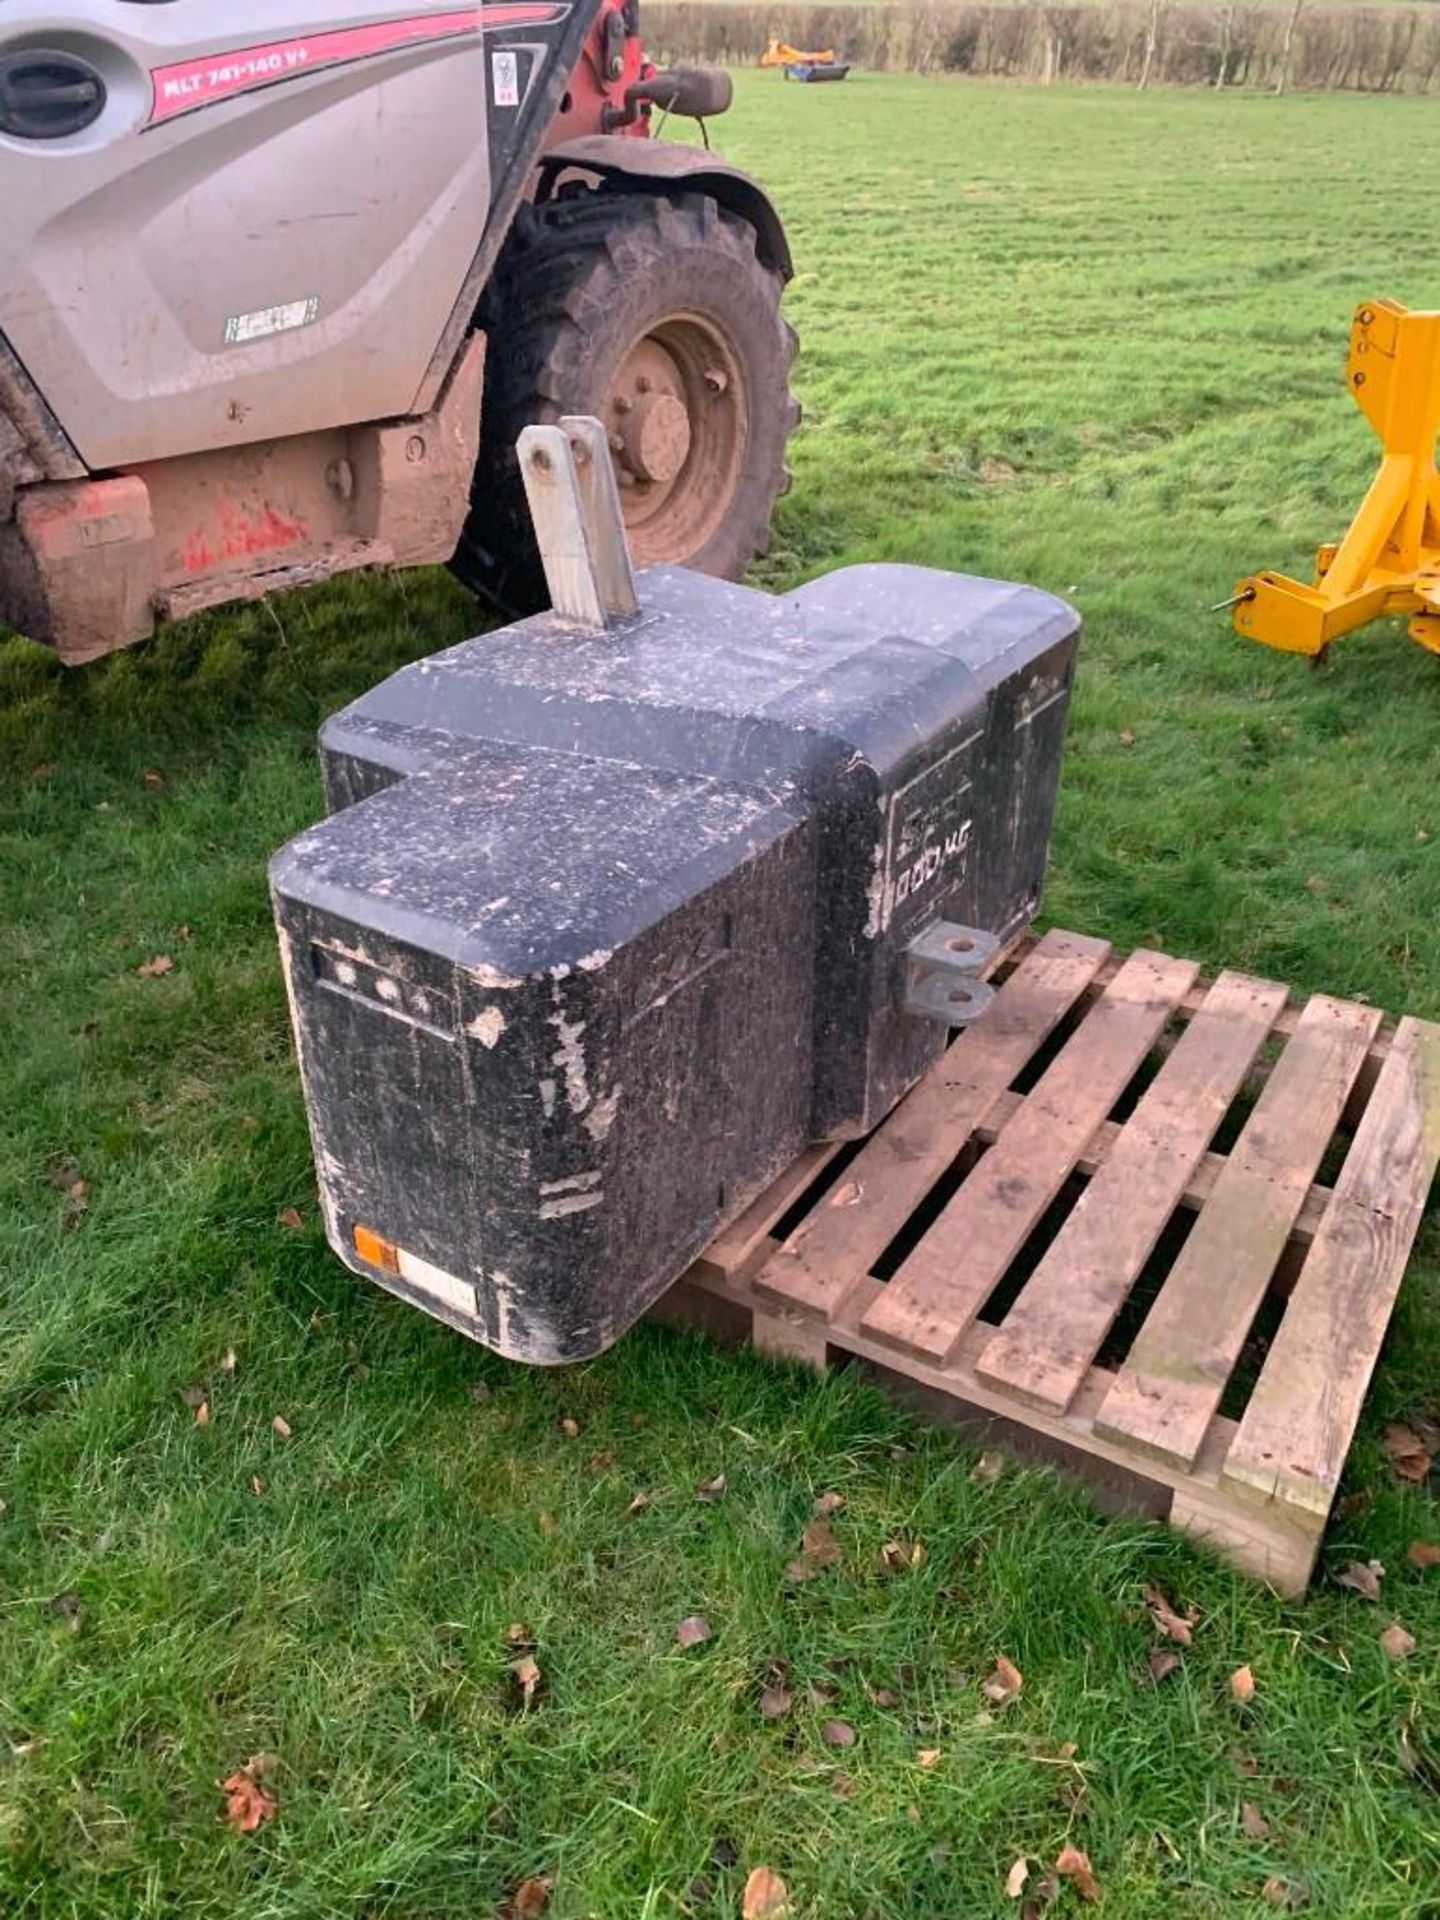 1,000kg Smartbox Weight Block / Toolbox, Removable 1 Tonne Weight - Image 3 of 6